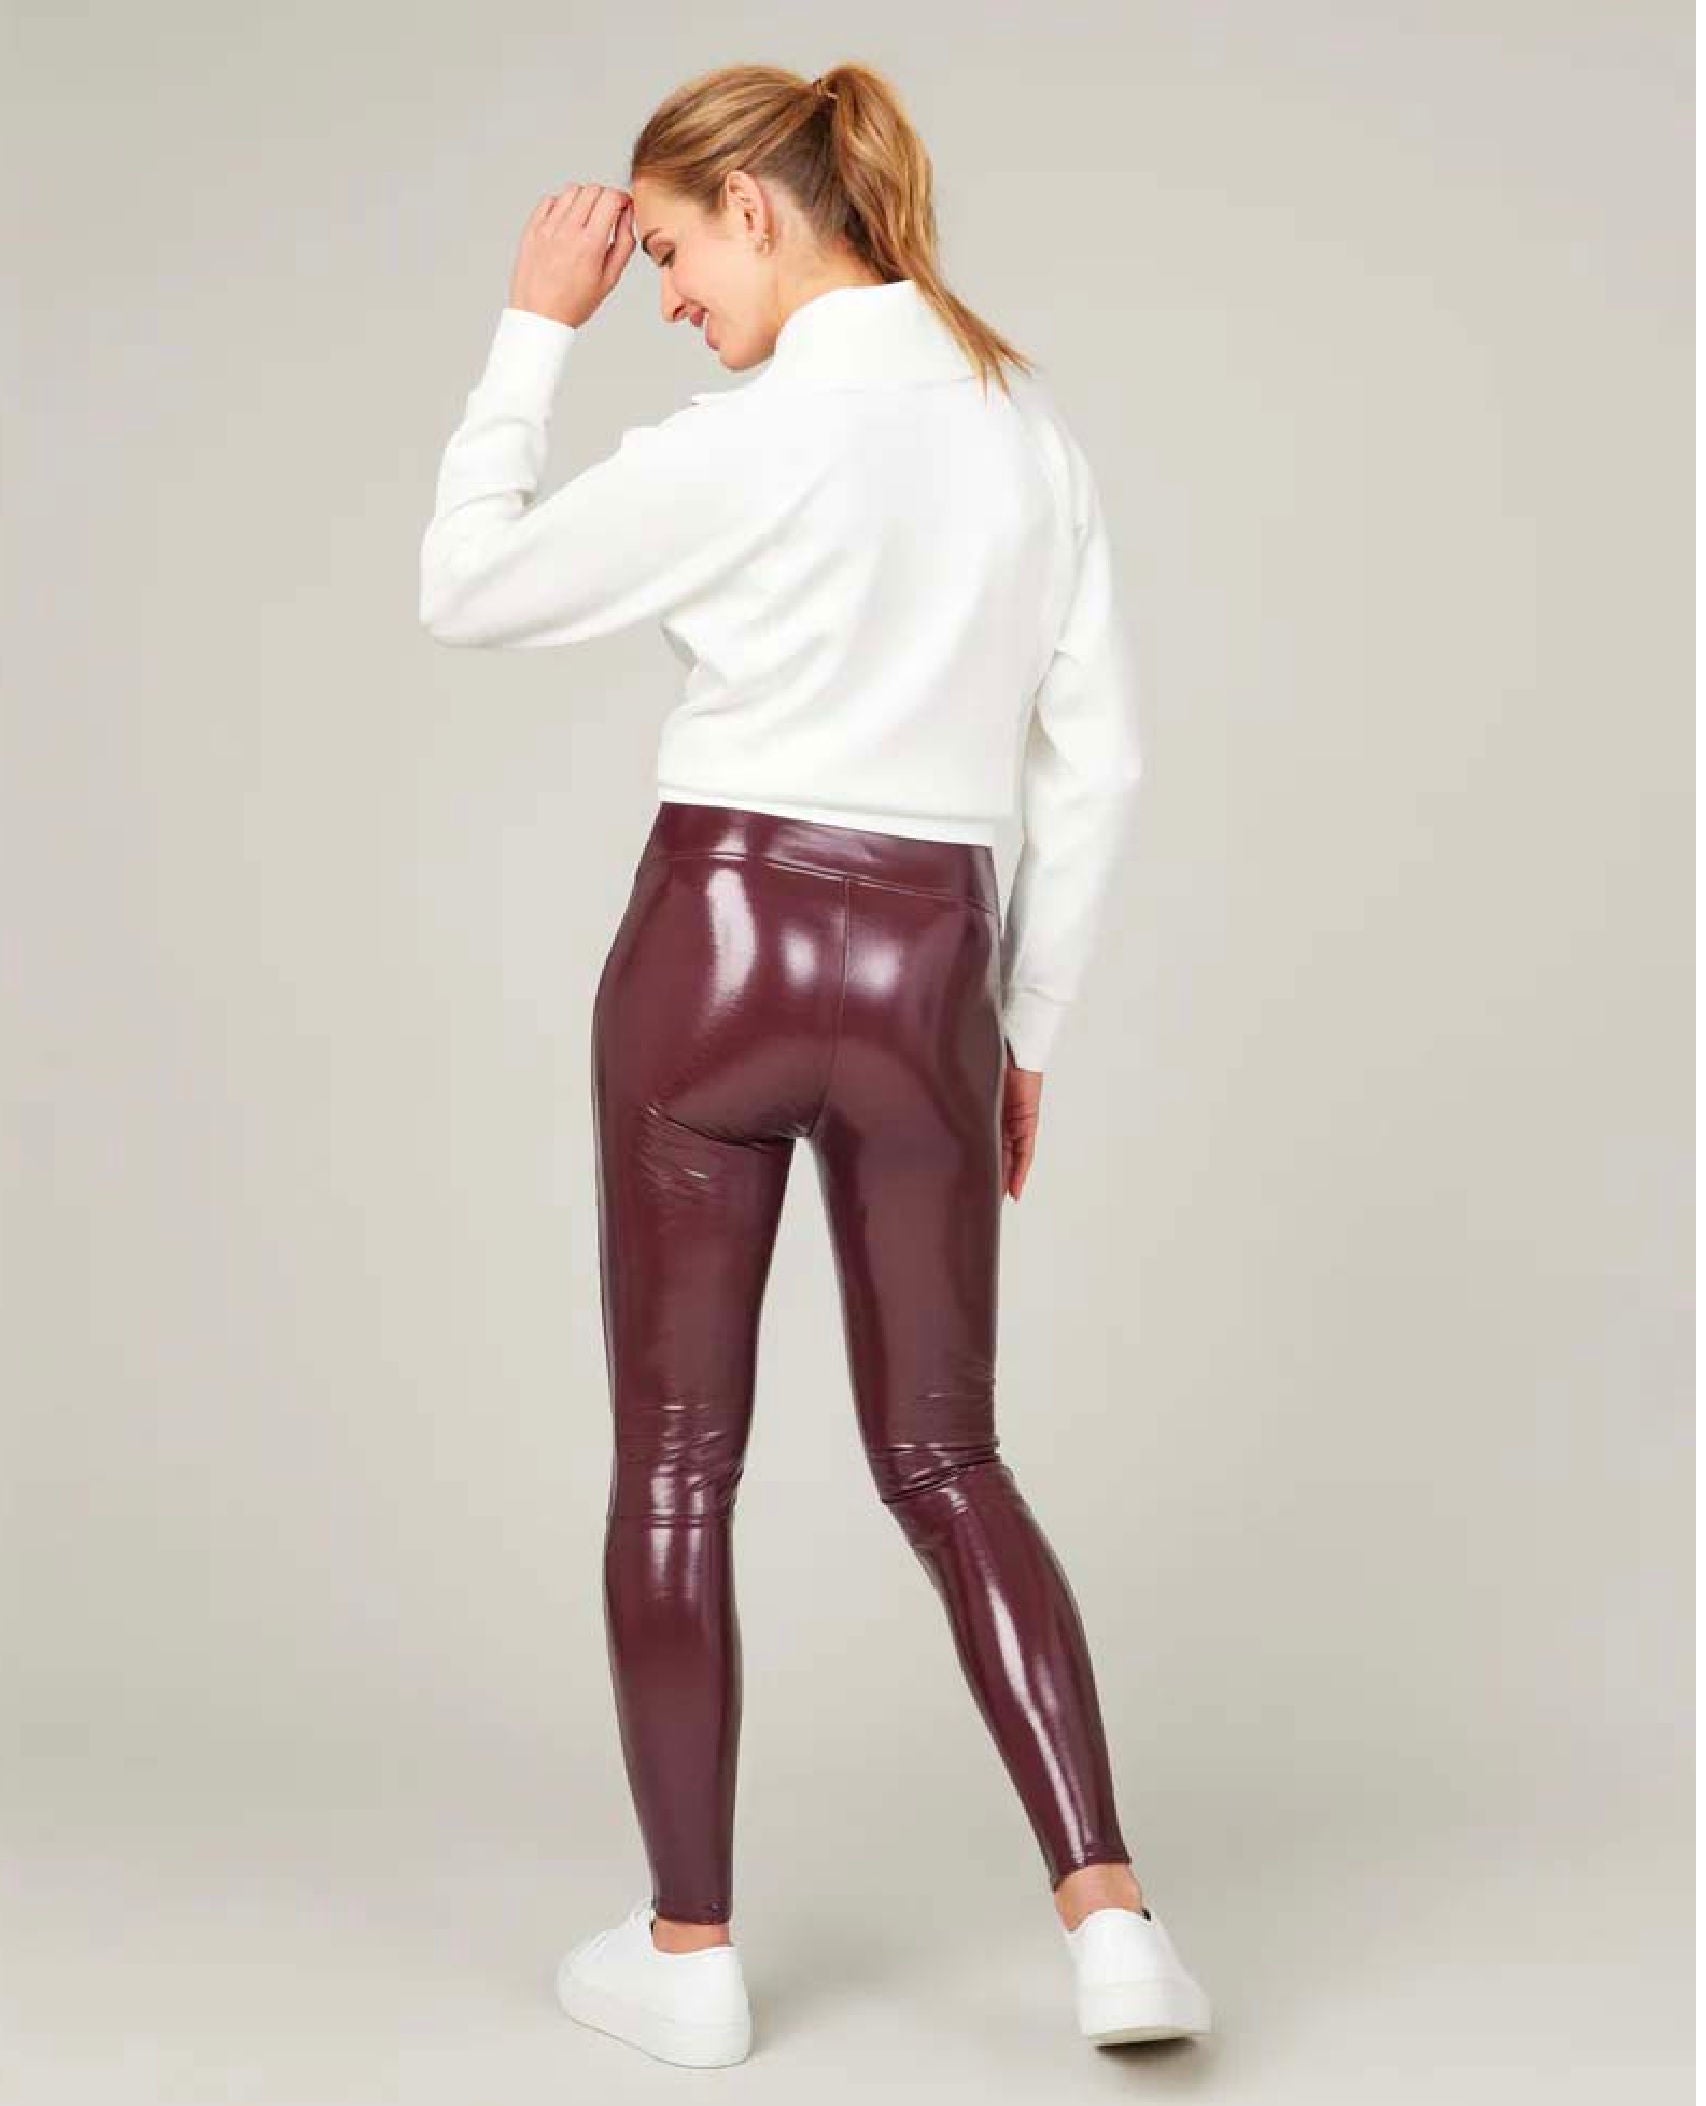 NWT Spanx Ruby Red Faux Patent Leather Leggings Size M Petite